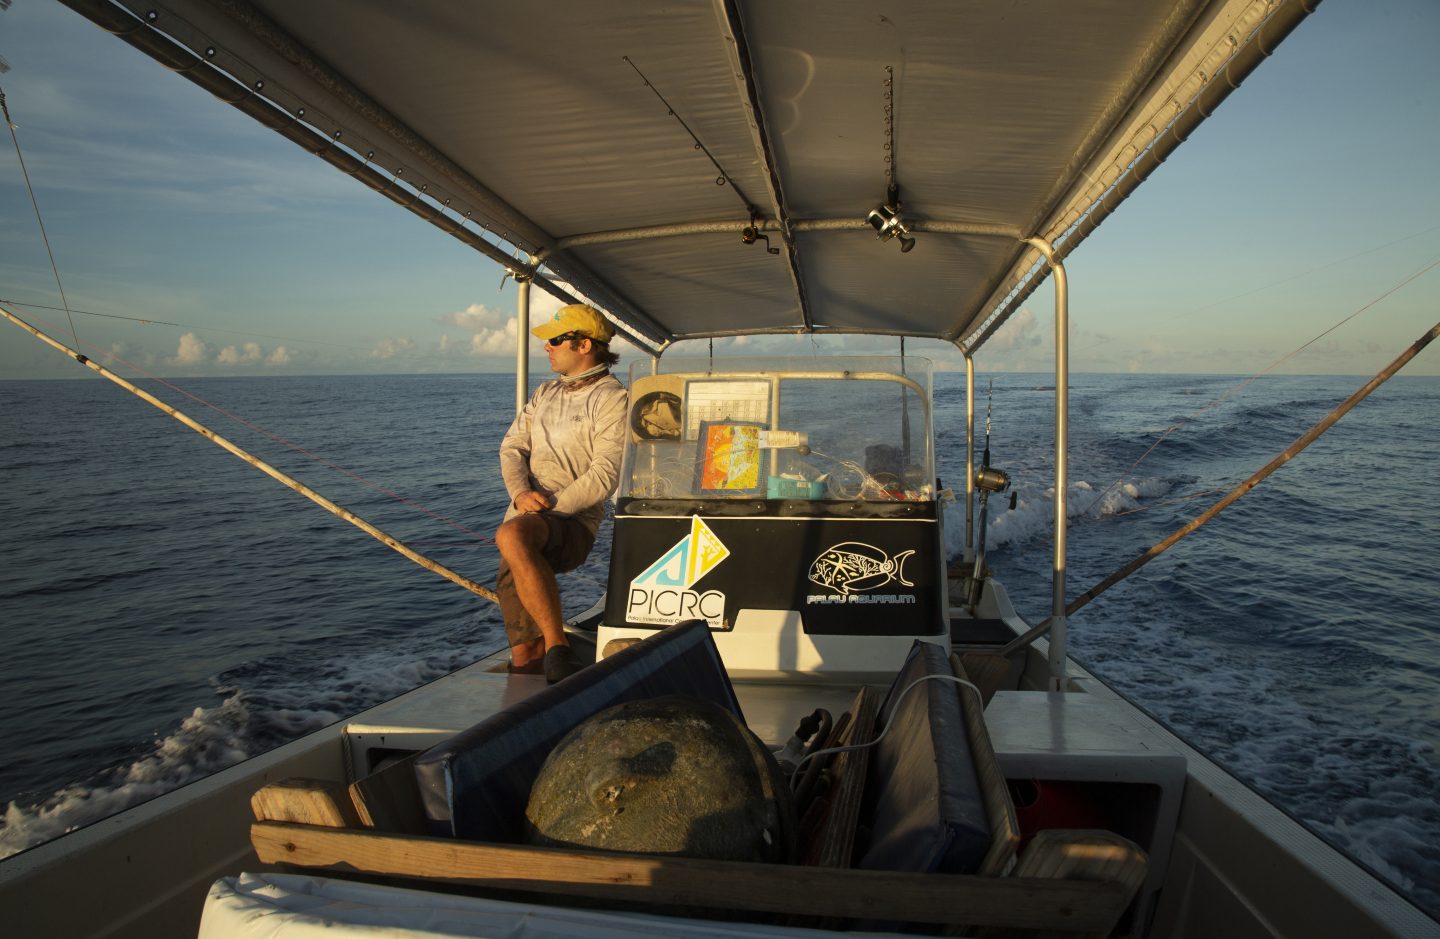 Fisheries biologist Dr Alexander Filous heading home after a day of tuna tagging